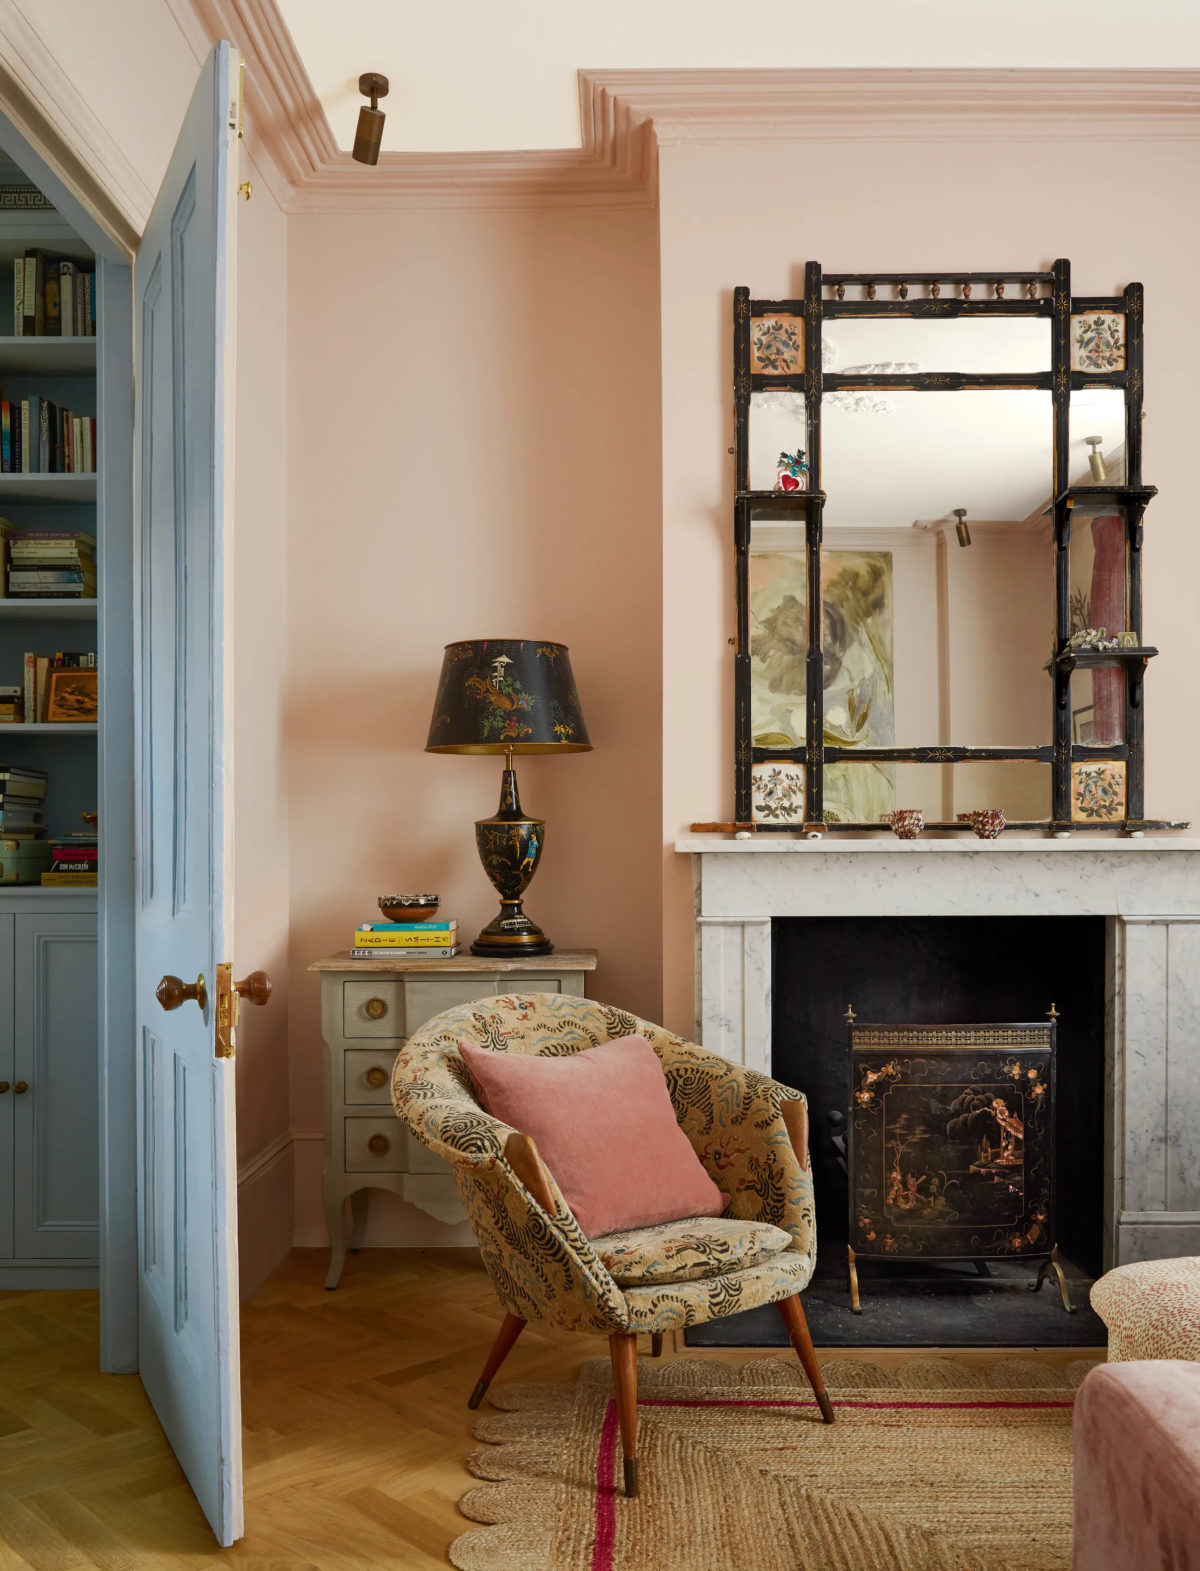 Image of a living room design by Rachel Chudley | Photography: Paul Massey